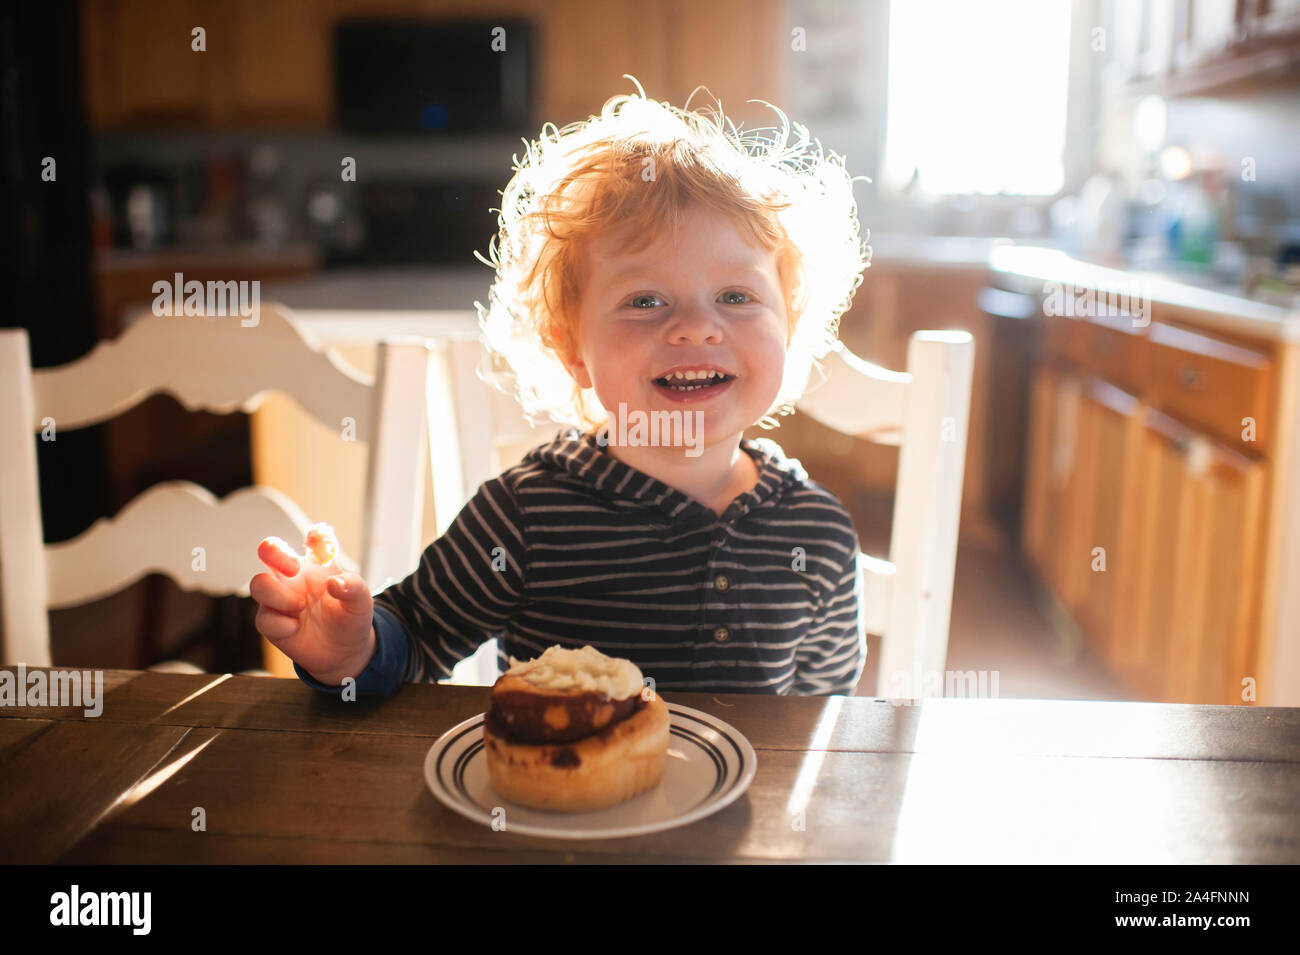 Toddler boy sitting at table enjoying a cinnamon roll at home Stock Photo